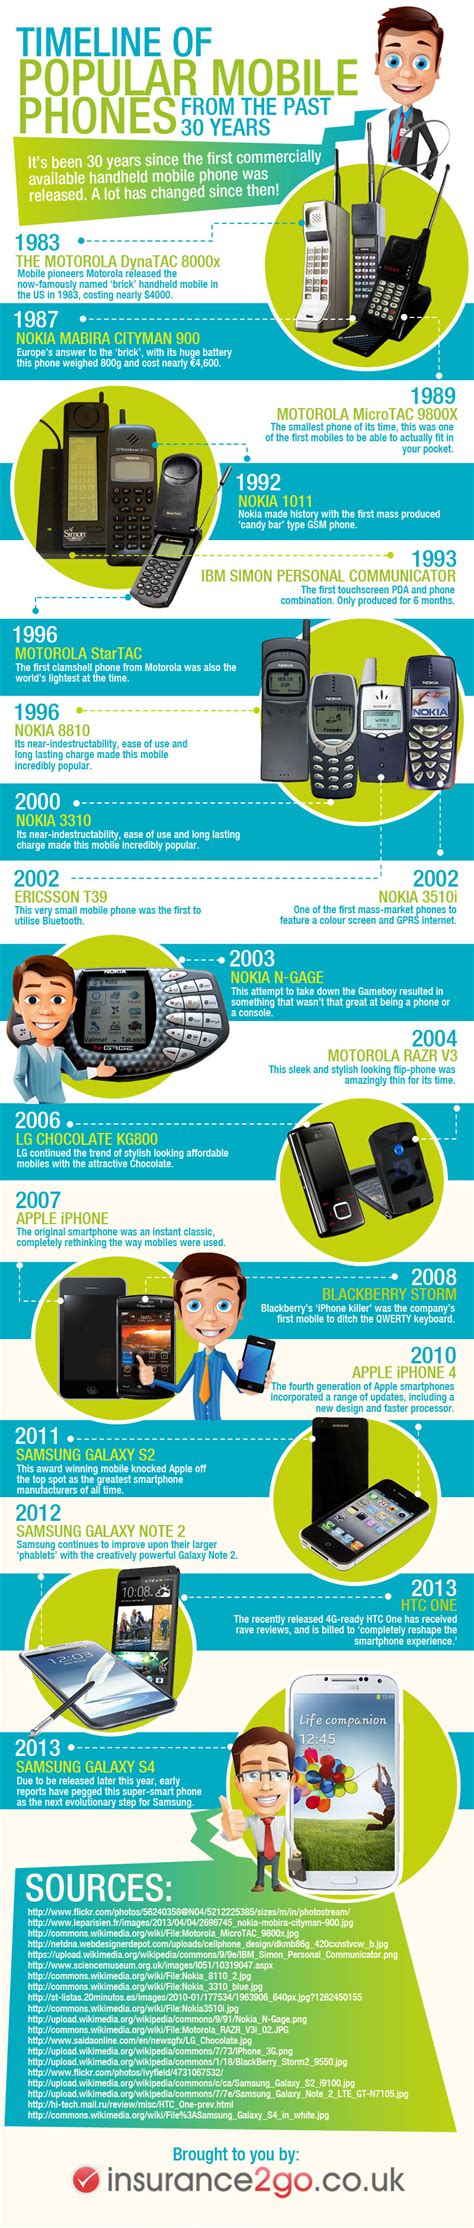 Timeline Of Popular Mobile Phones Infographic Infographic List